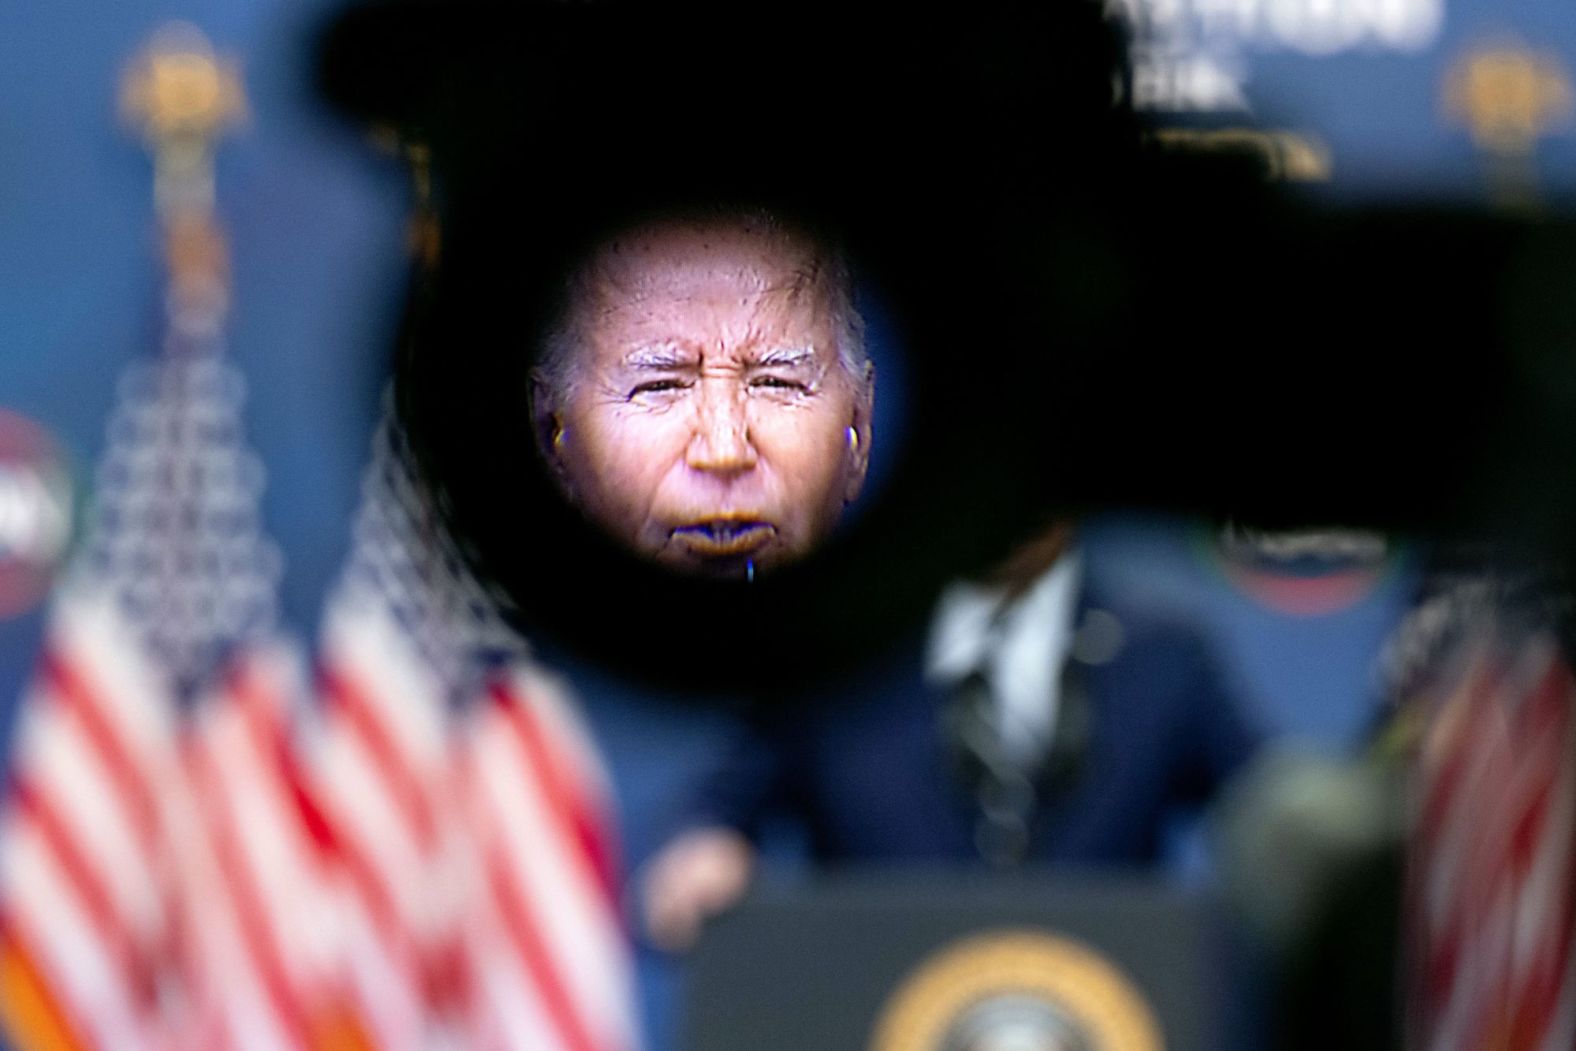 President Joe Biden is seen in the viewfinder of a video camera as he delivers virtual remarks during the National Action Network Convention in Washington, DC, on Friday, April 12.